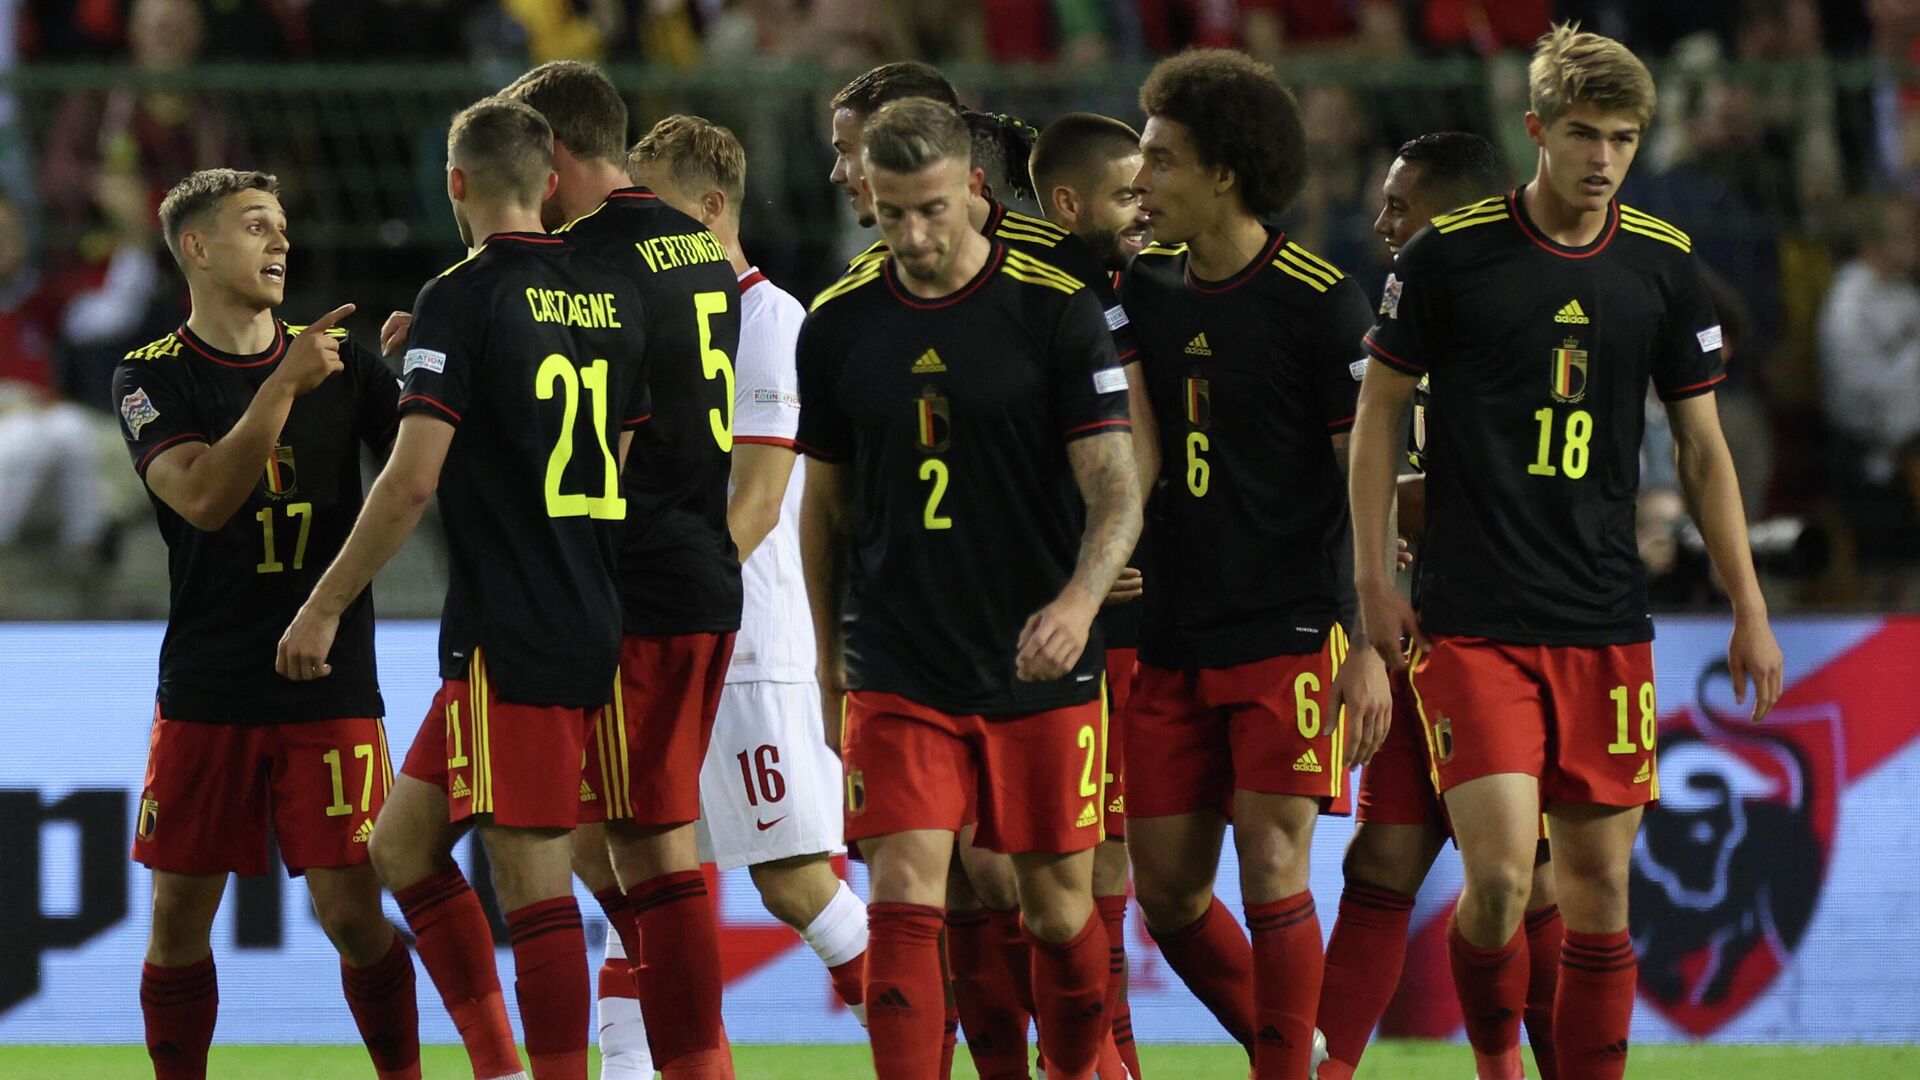 Belgium defeated Poland in the League of Nations match.